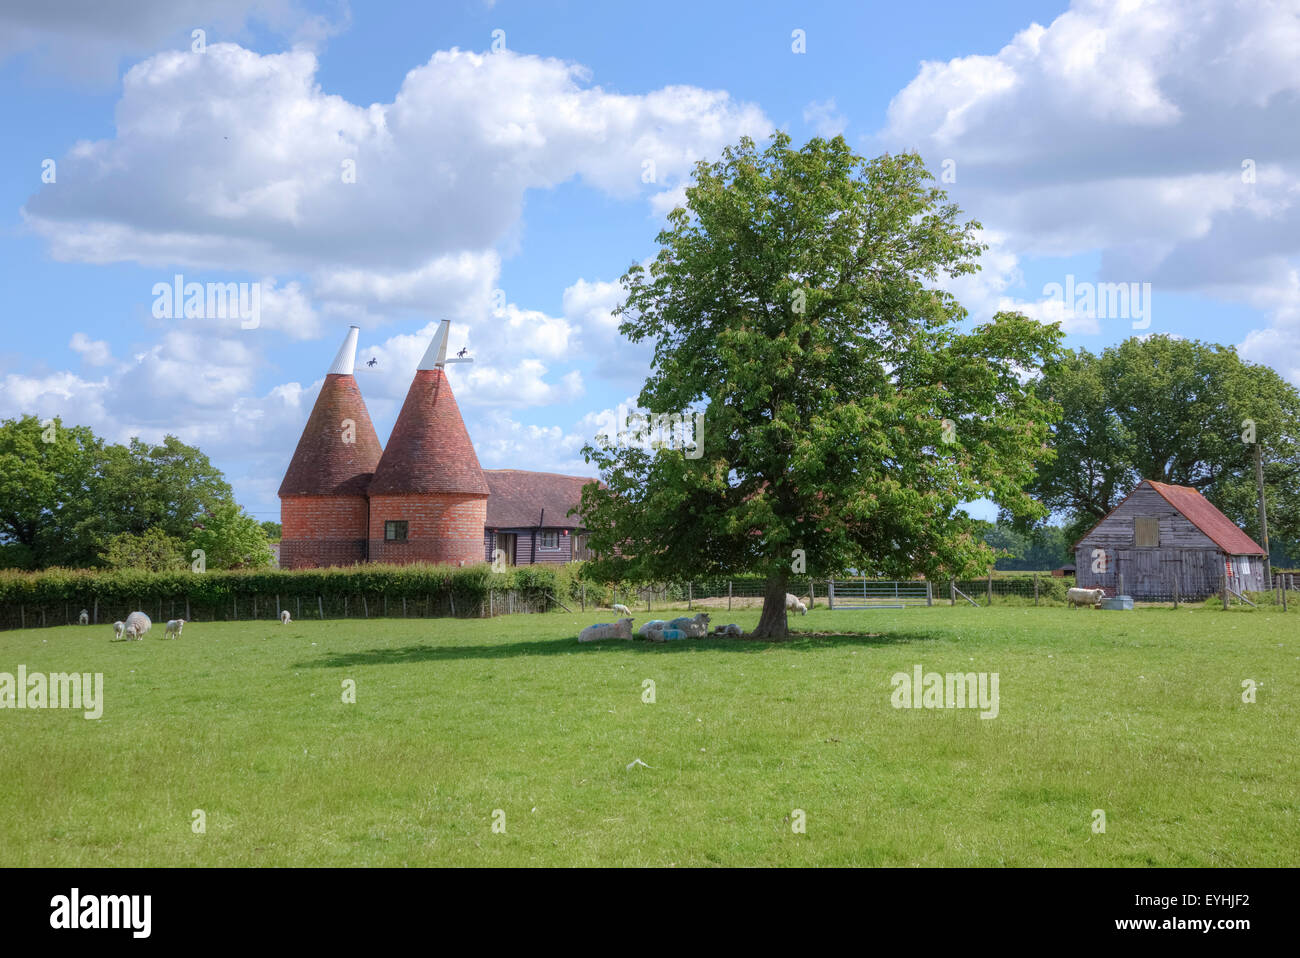 The Maltings, Ashford, Kent, Angleterre, Royaume-Uni Banque D'Images